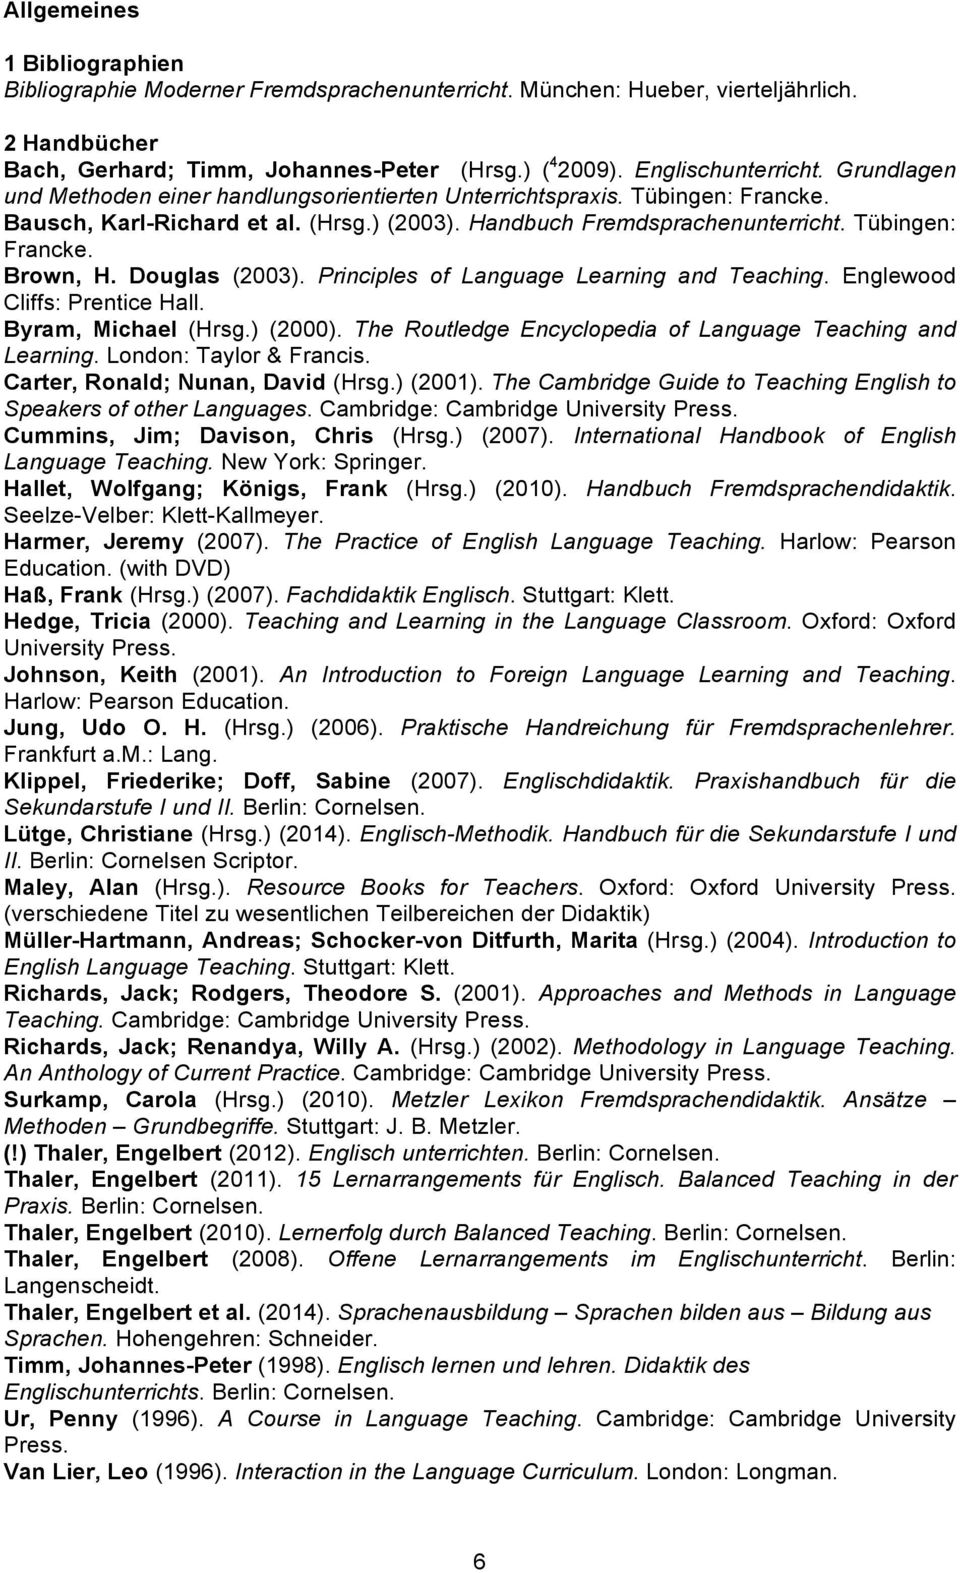 Douglas (2003). Principles of Language Learning and Teaching. Englewood Cliffs: Prentice Hall. Byram, Michael (Hrsg.) (2000). The Routledge Encyclopedia of Language Teaching and Learning.